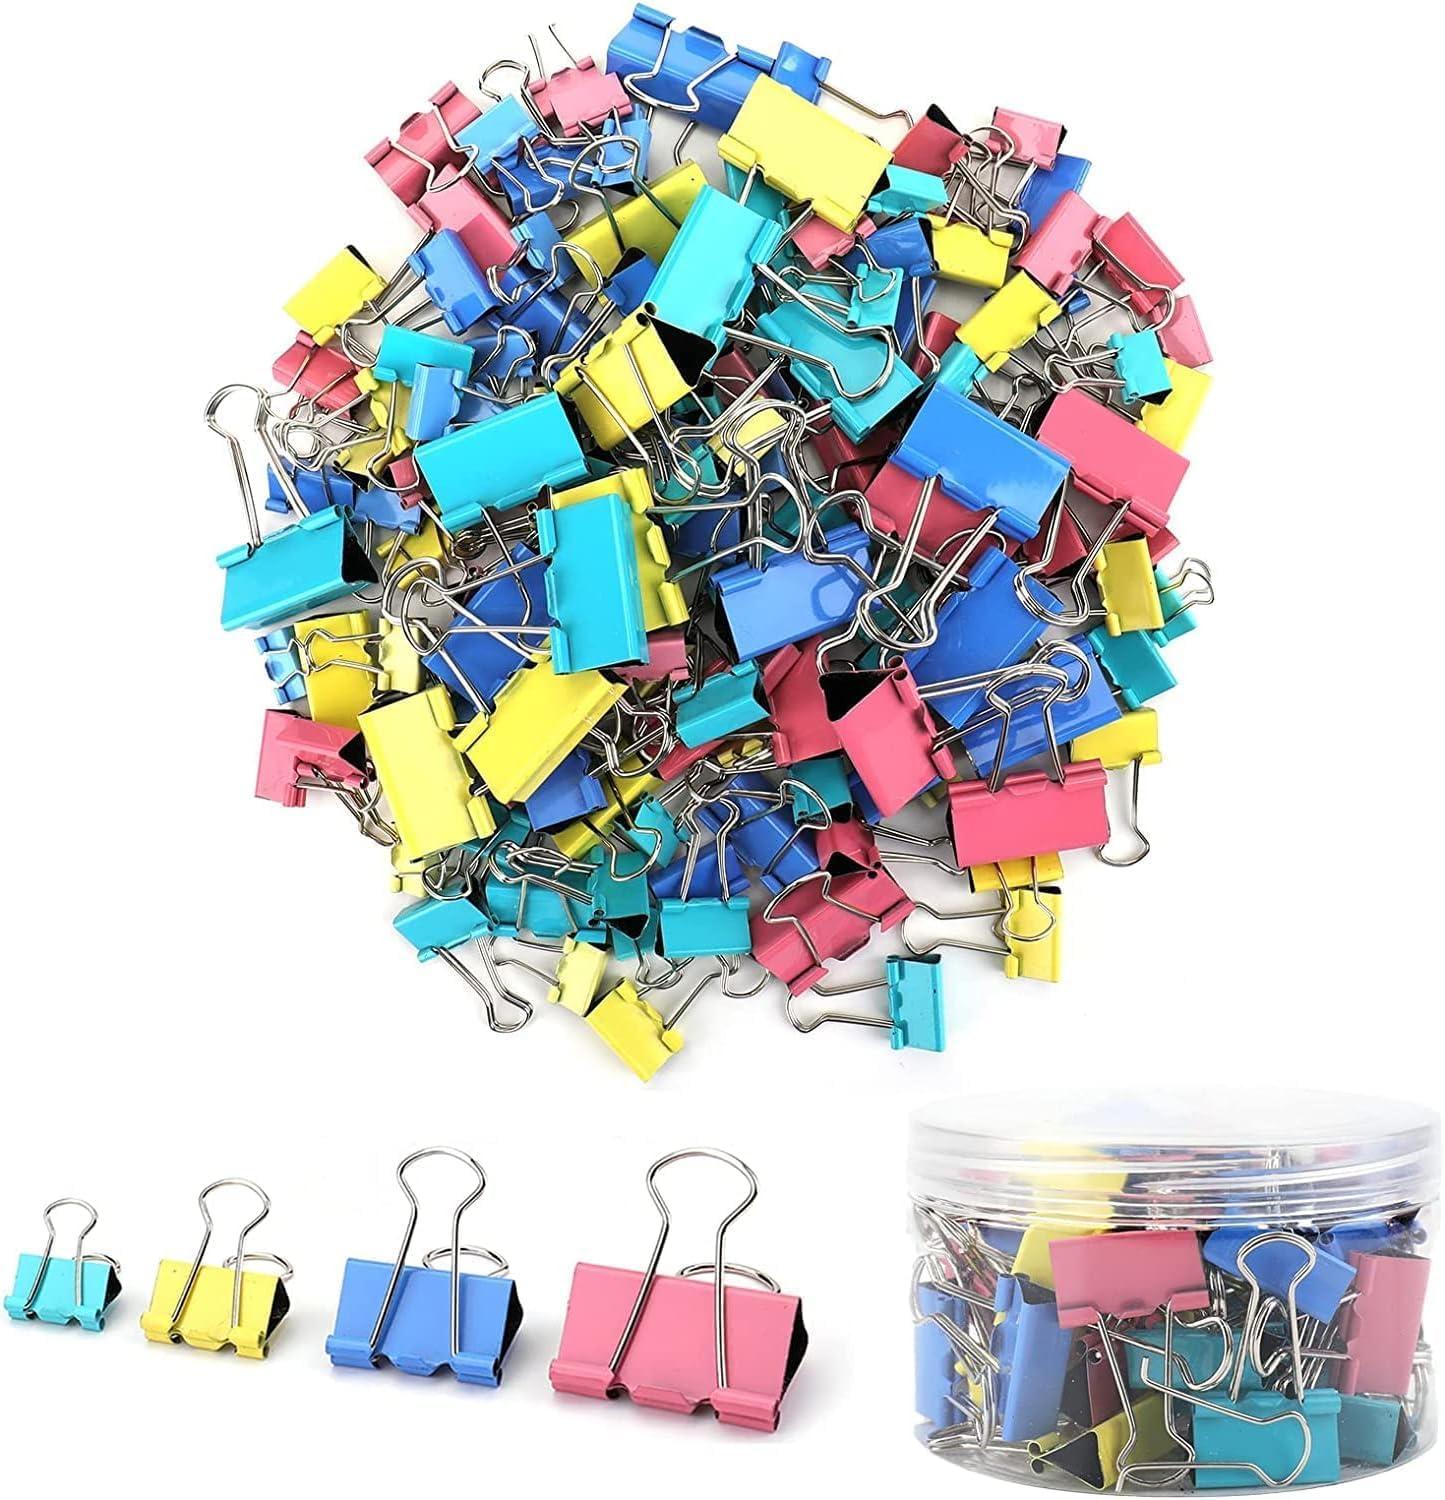 nicunom 272 pcs binder clips paper clamps assorted 4 sizes metal fold back clips for office school and home